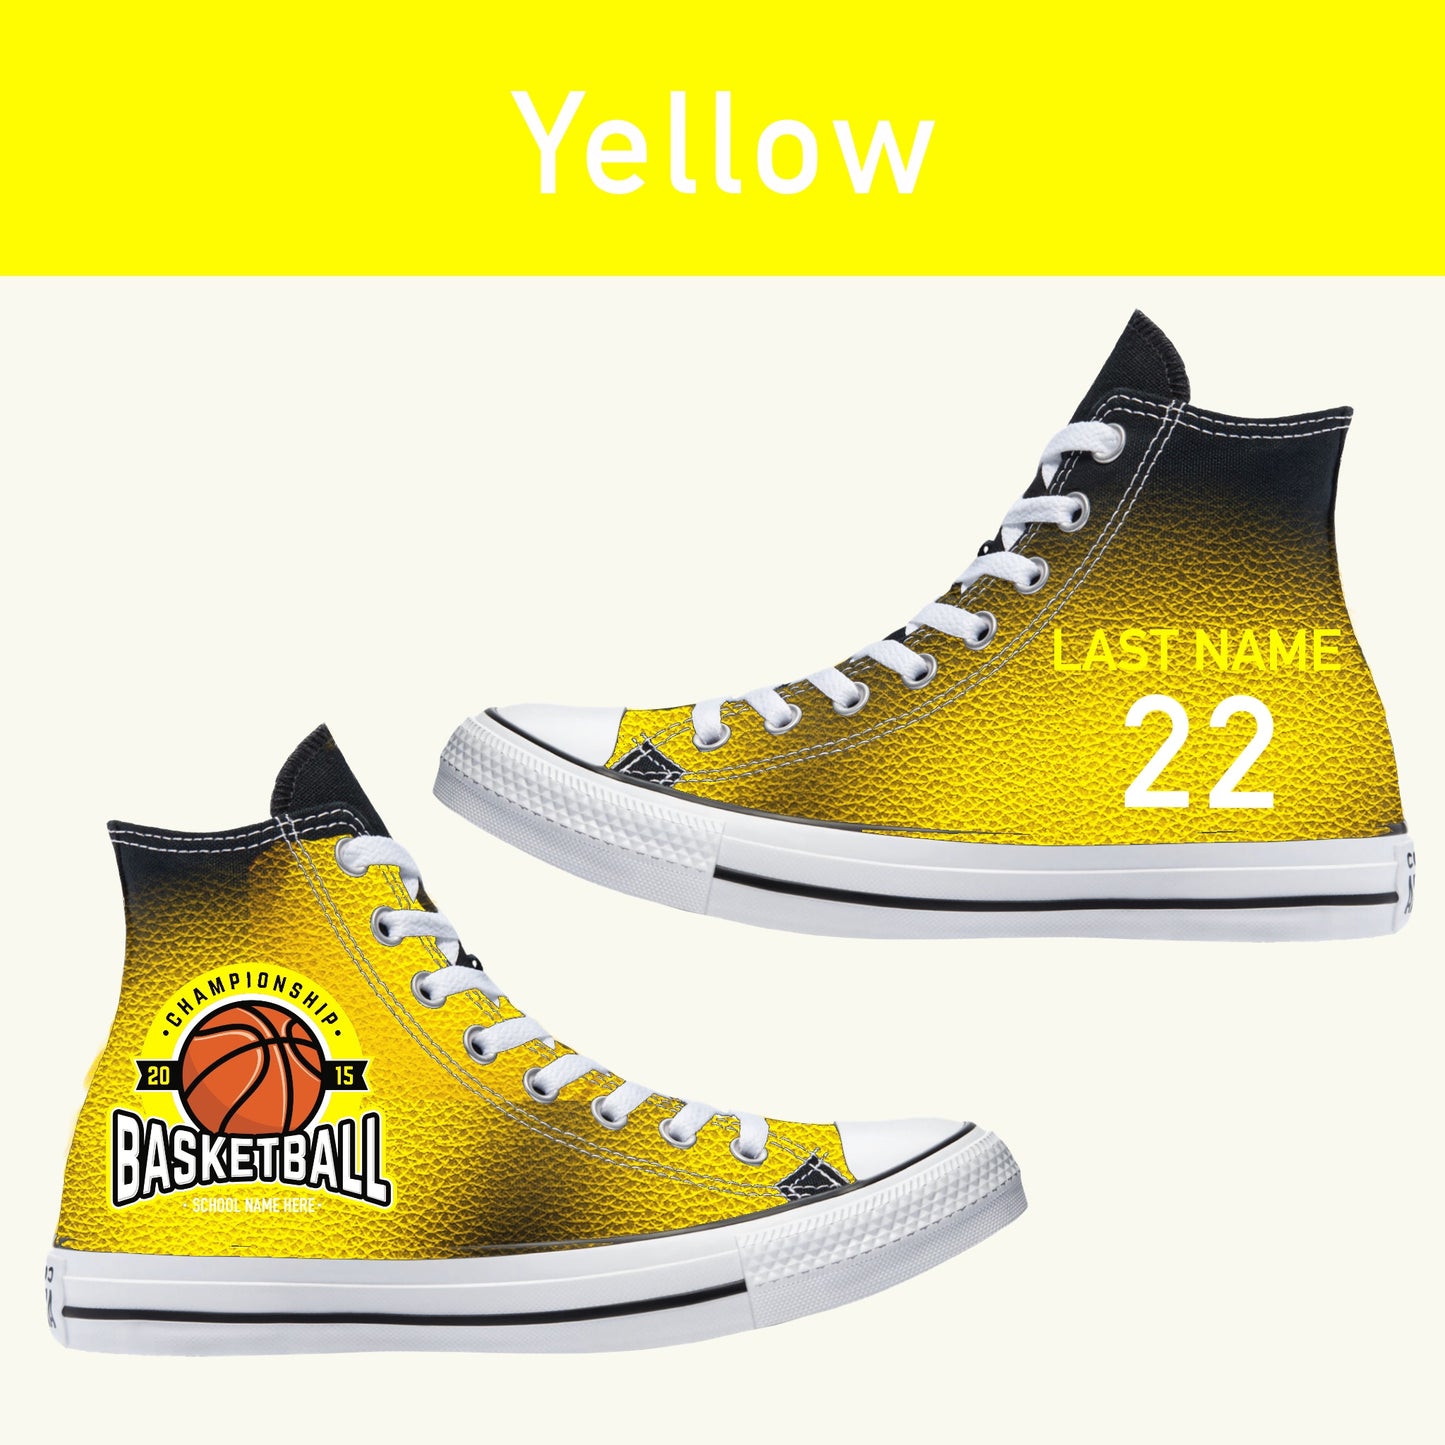 Basketball Sneakers Jersey Fade - Multiple Colors Available - Custom Converse Shoes